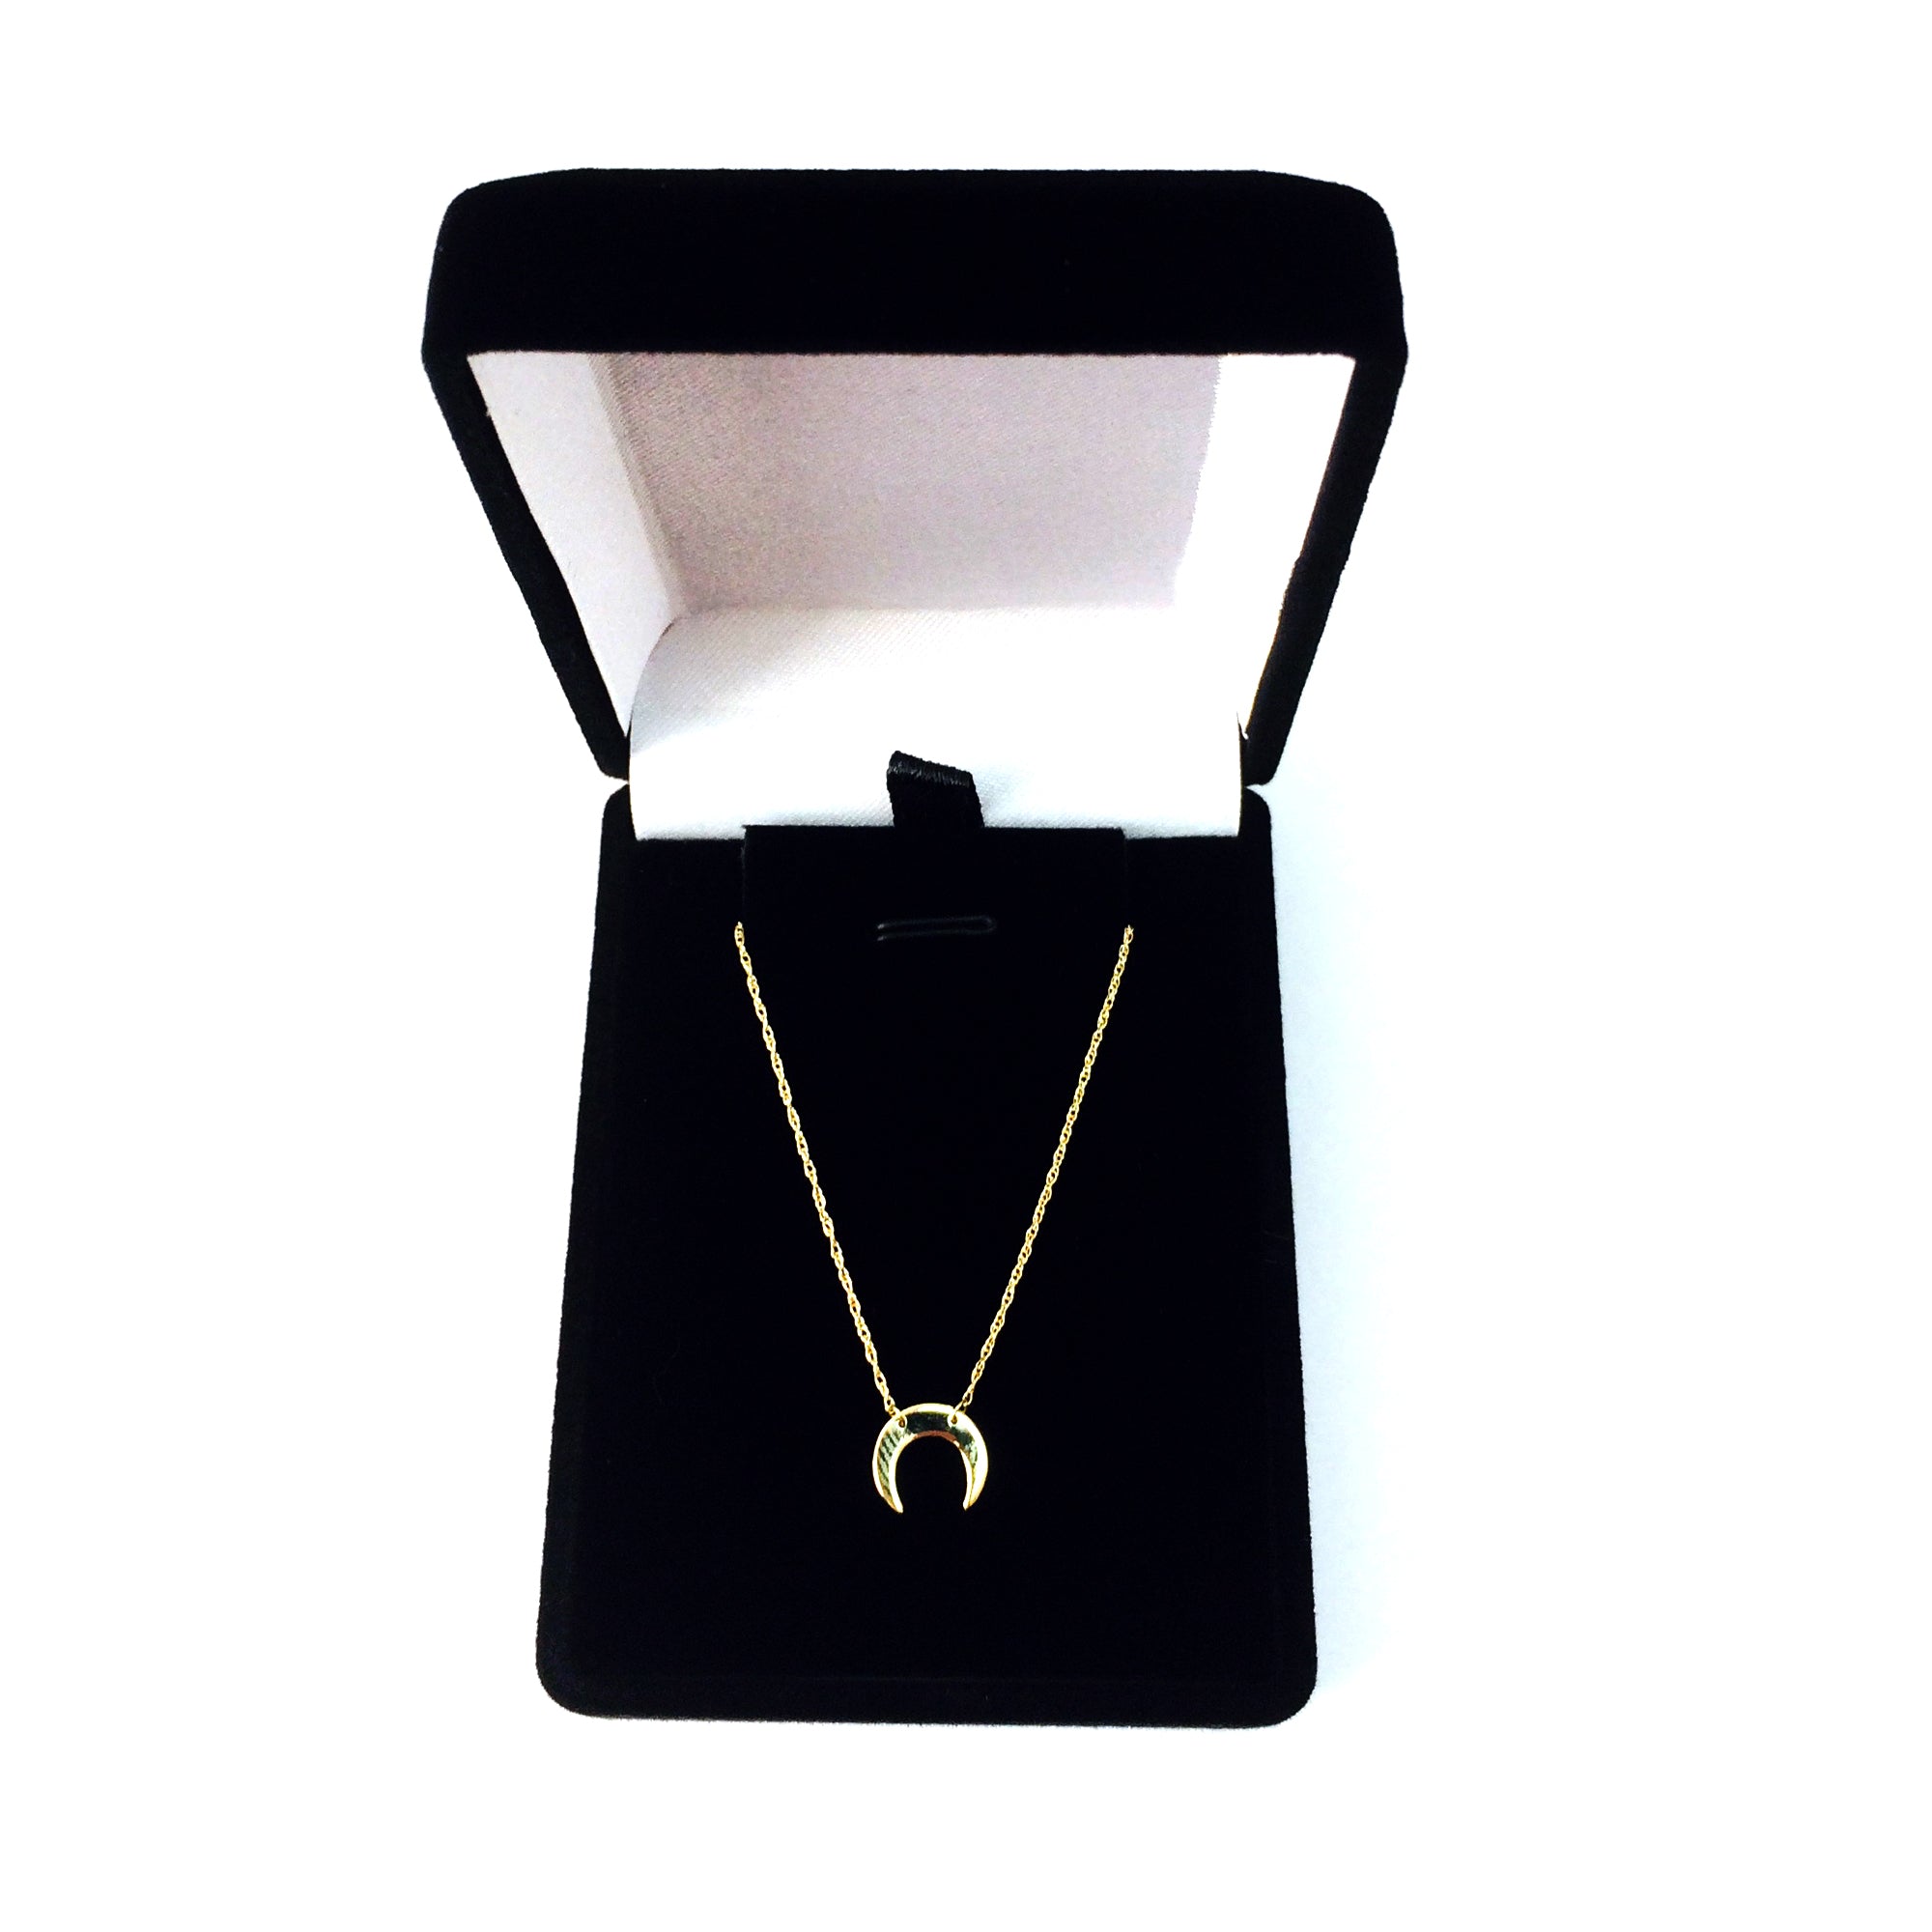 14K Yellow Gold Mini Crescent Moon Pendant Necklace, 16" To 18" Adjustable fine designer jewelry for men and women